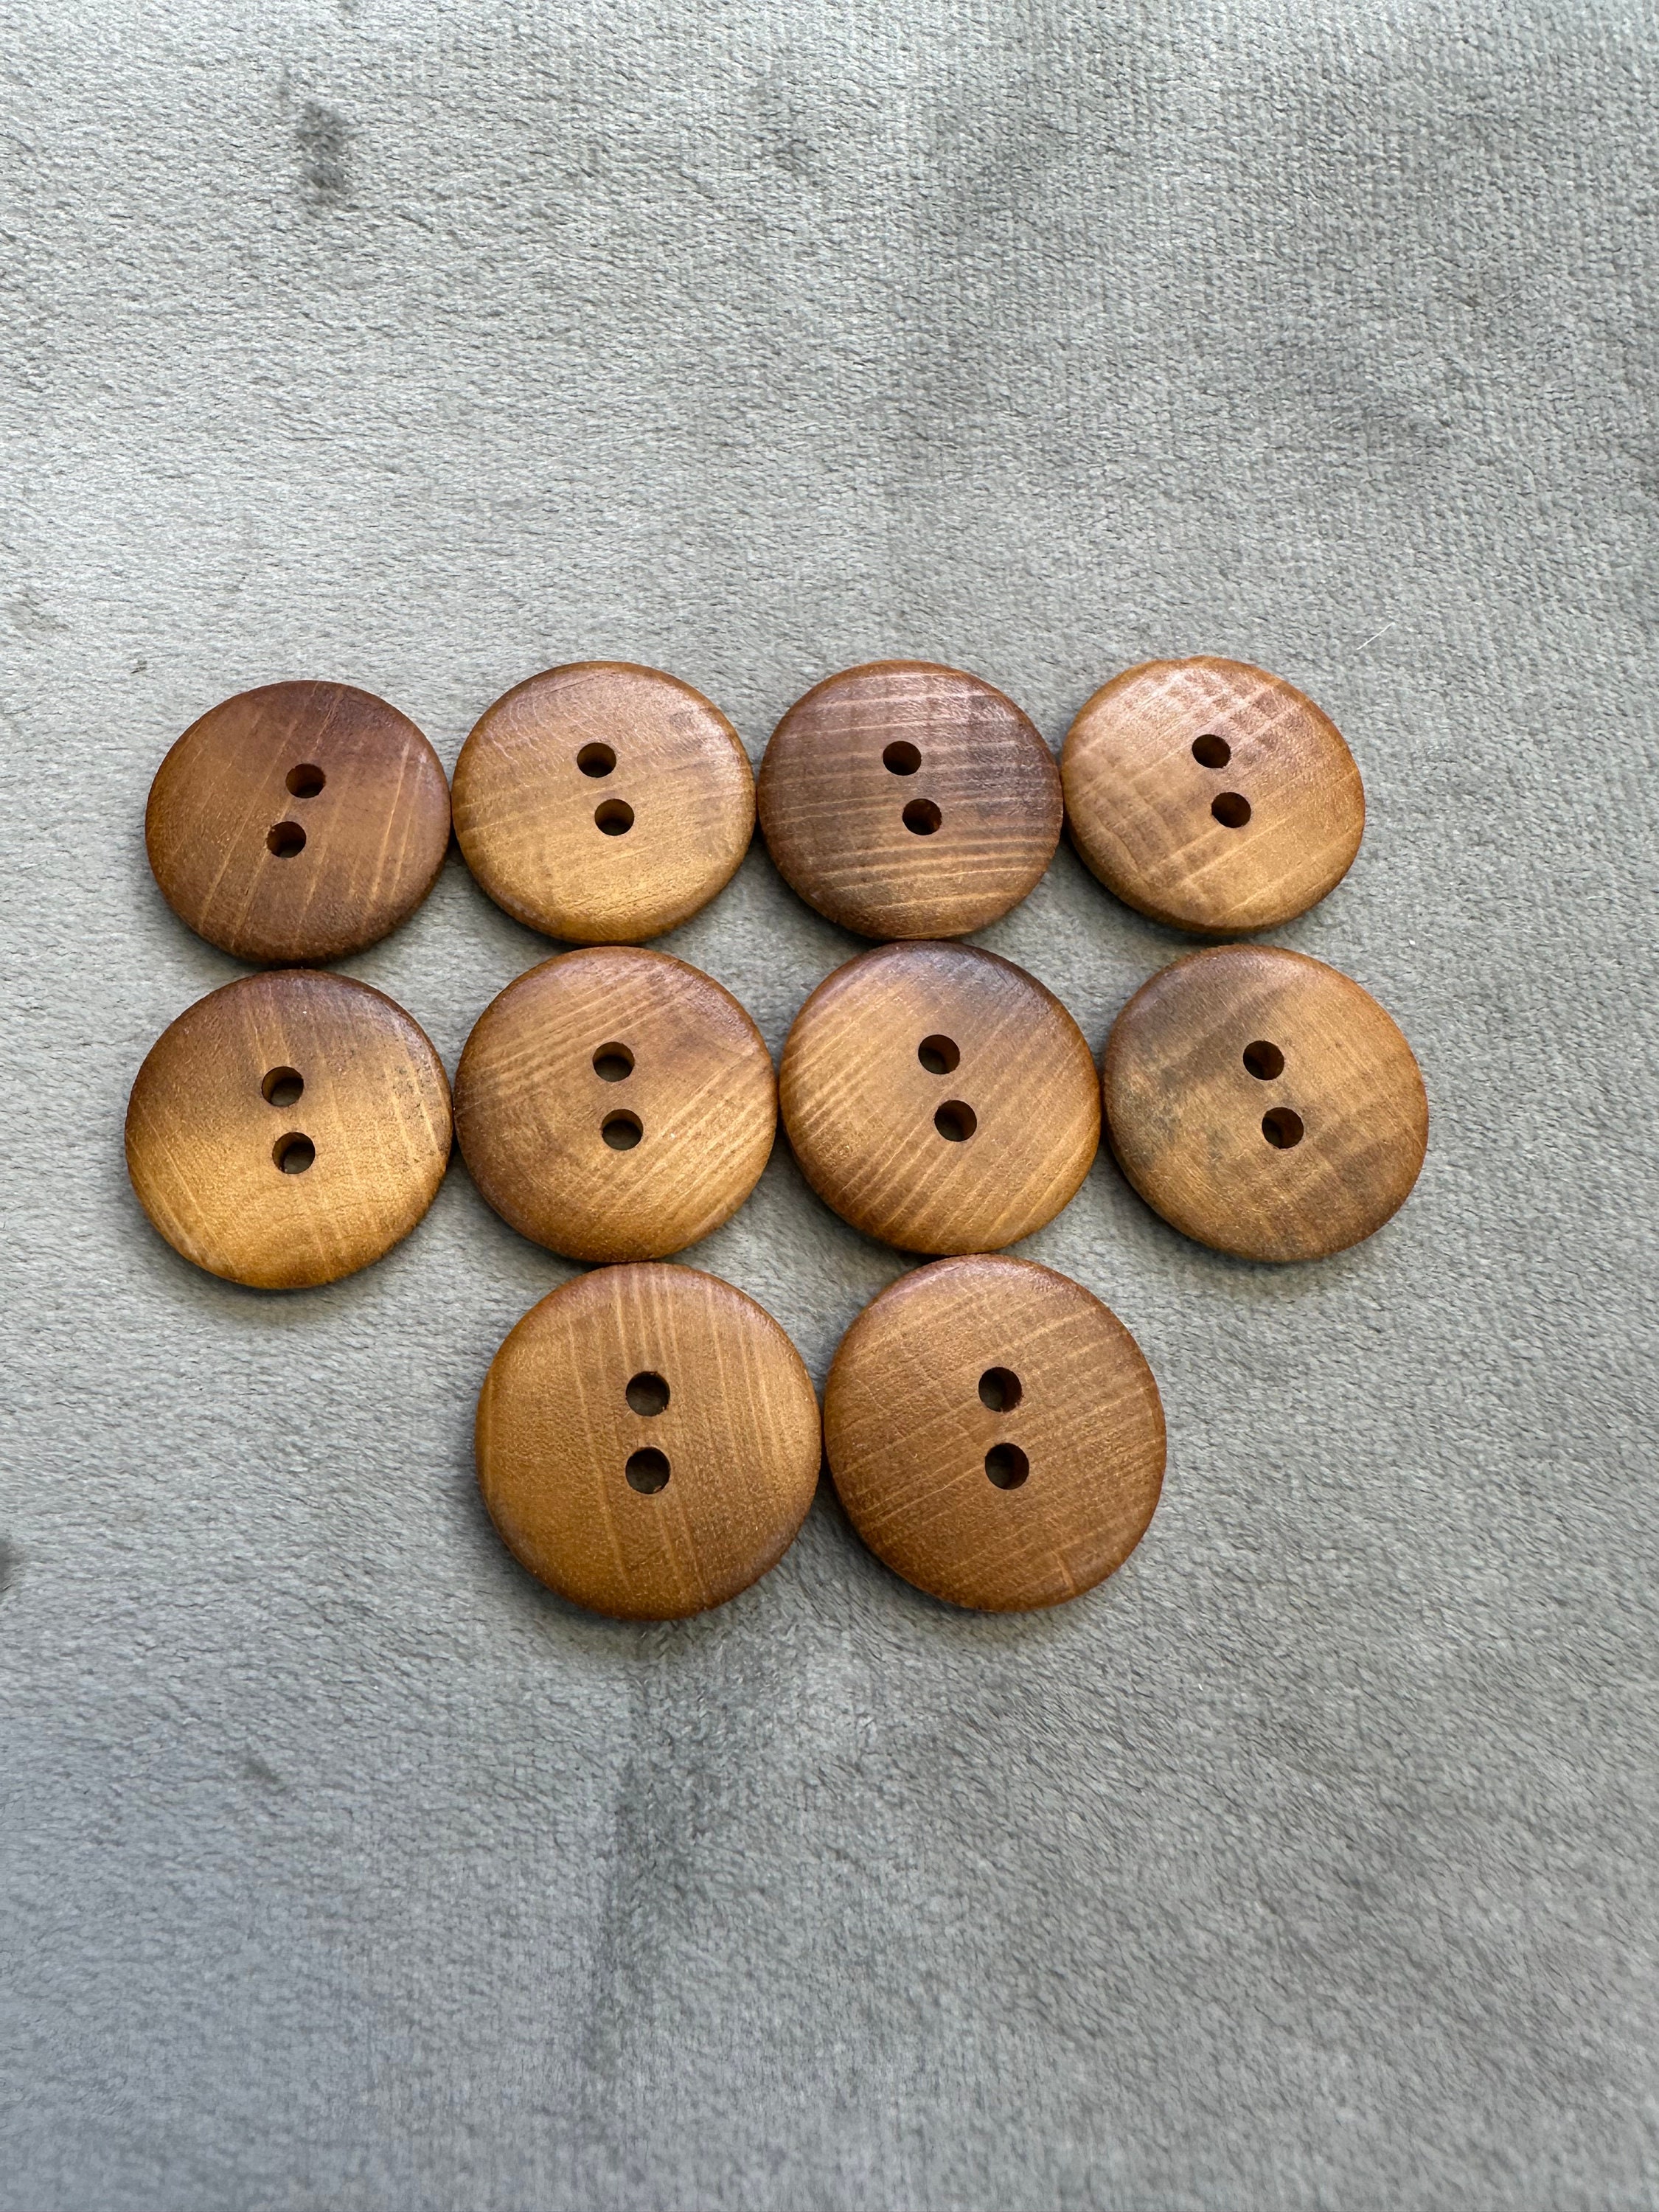 Tiny Round Americana 1572 - Quilt 2 hole Buttons - Buttons Galore